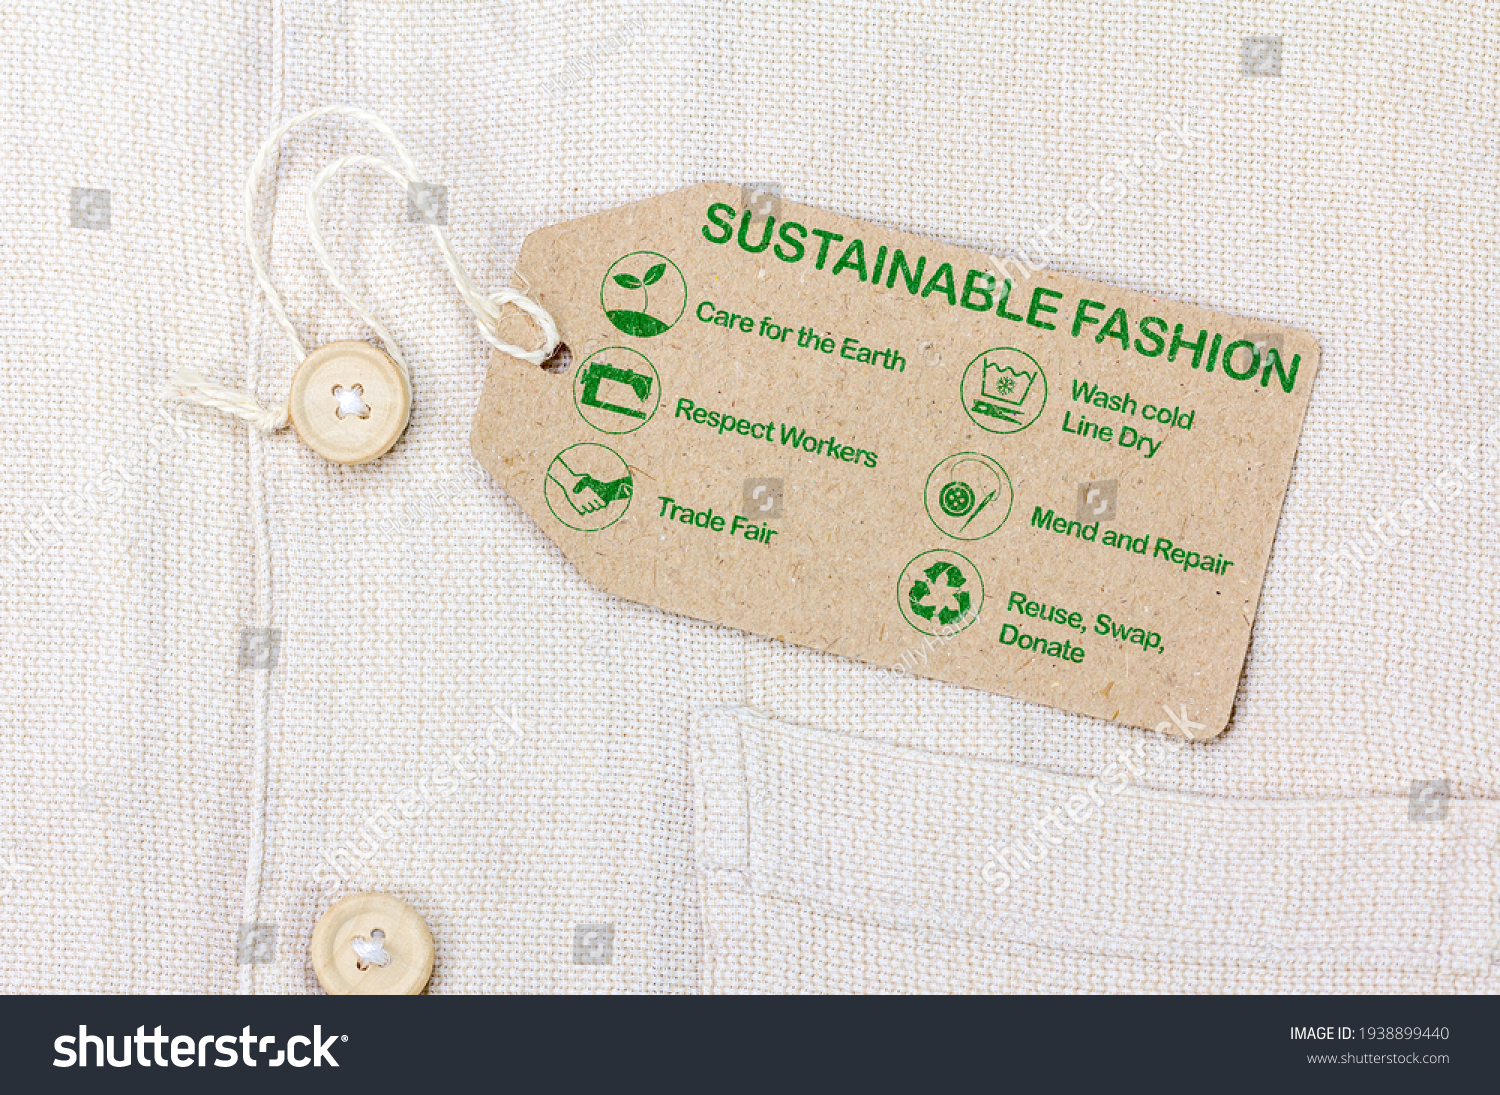 Sustainable fashion label with text and icons #1938899440